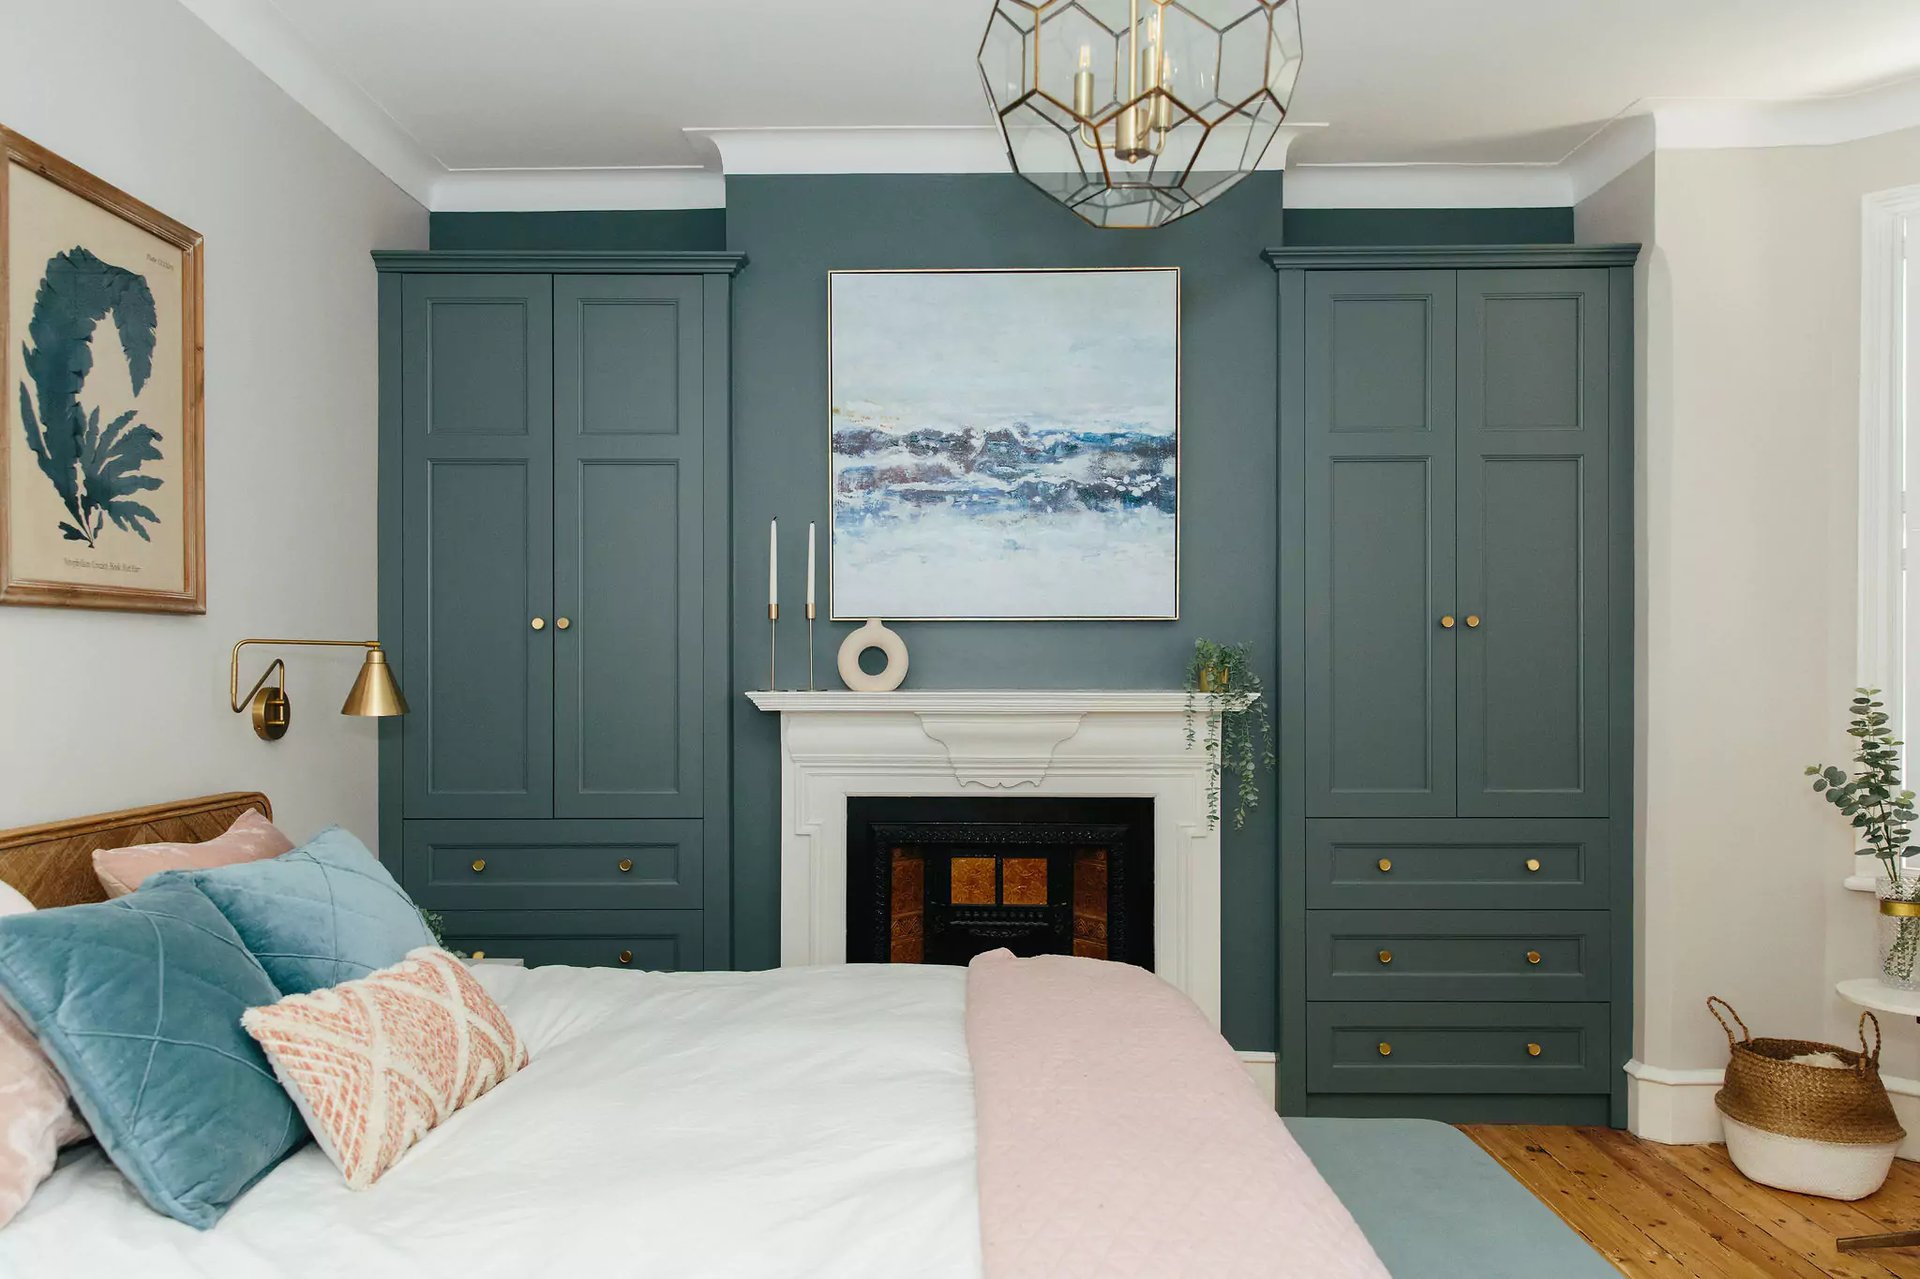 Bespoke fitted wardrobe in turquoise bedroom